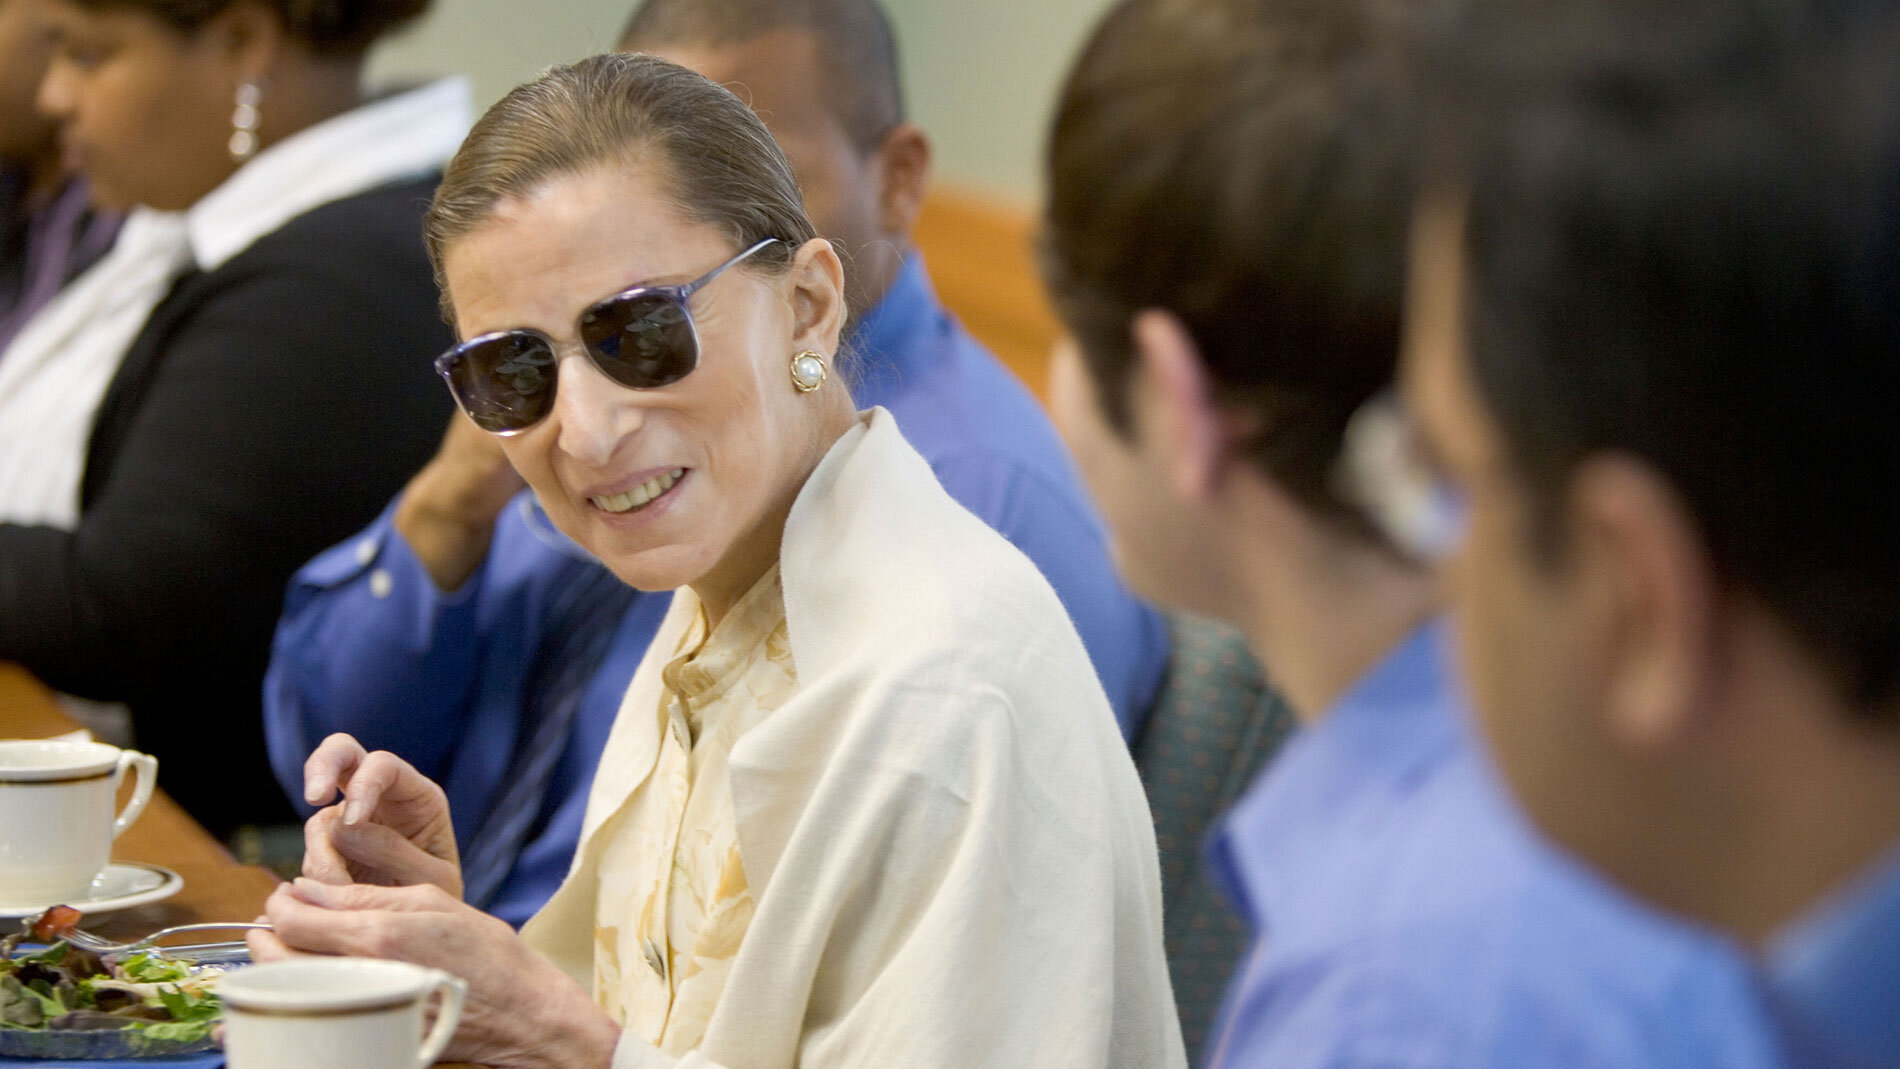 U.S. Supreme Court Justice Ruth Bader Ginsburg has lunch with a group of Wake Forest law students in the Worrell Professional Center on Wednesday, September 28, 2005. https://www.flickr.com/photos/wfulawschool/1084364715